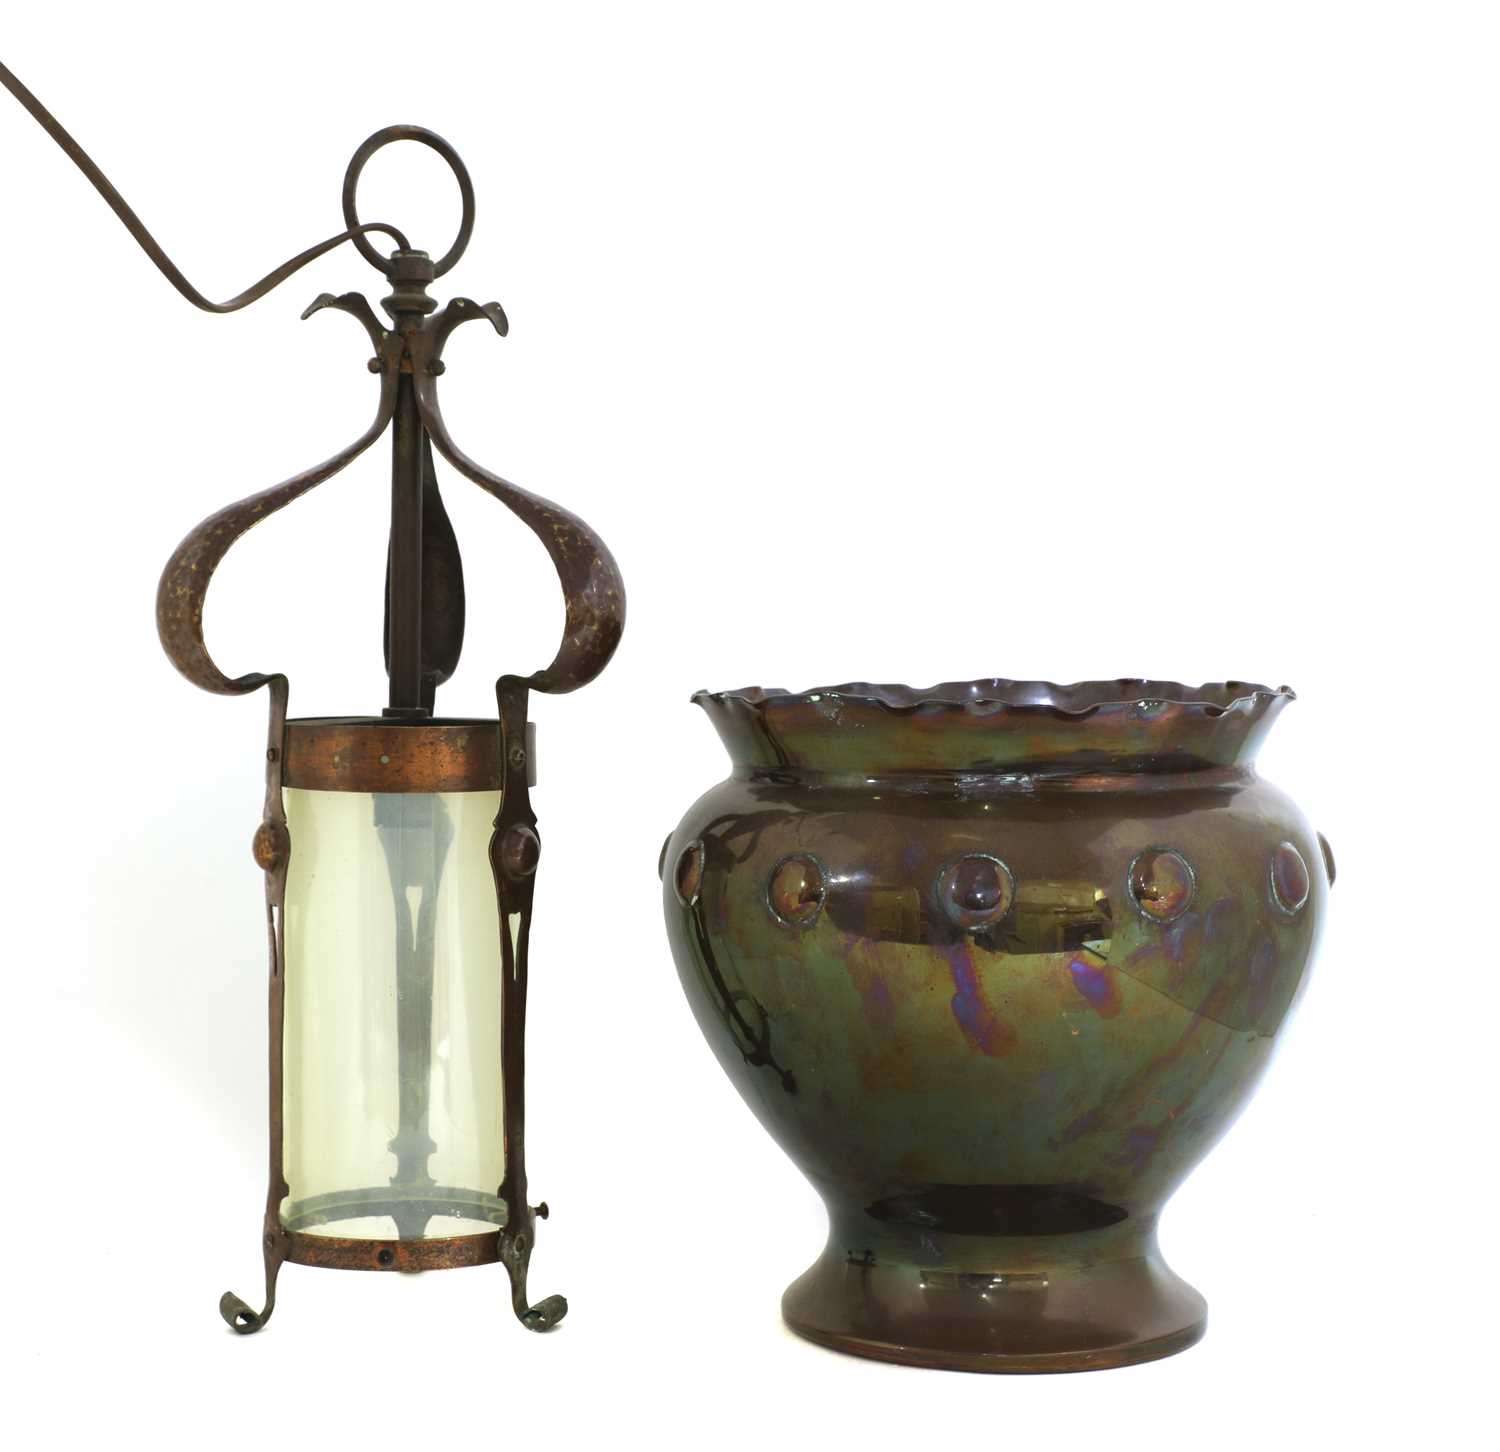 Lot 93 - An Arts and Crafts copper hall lantern